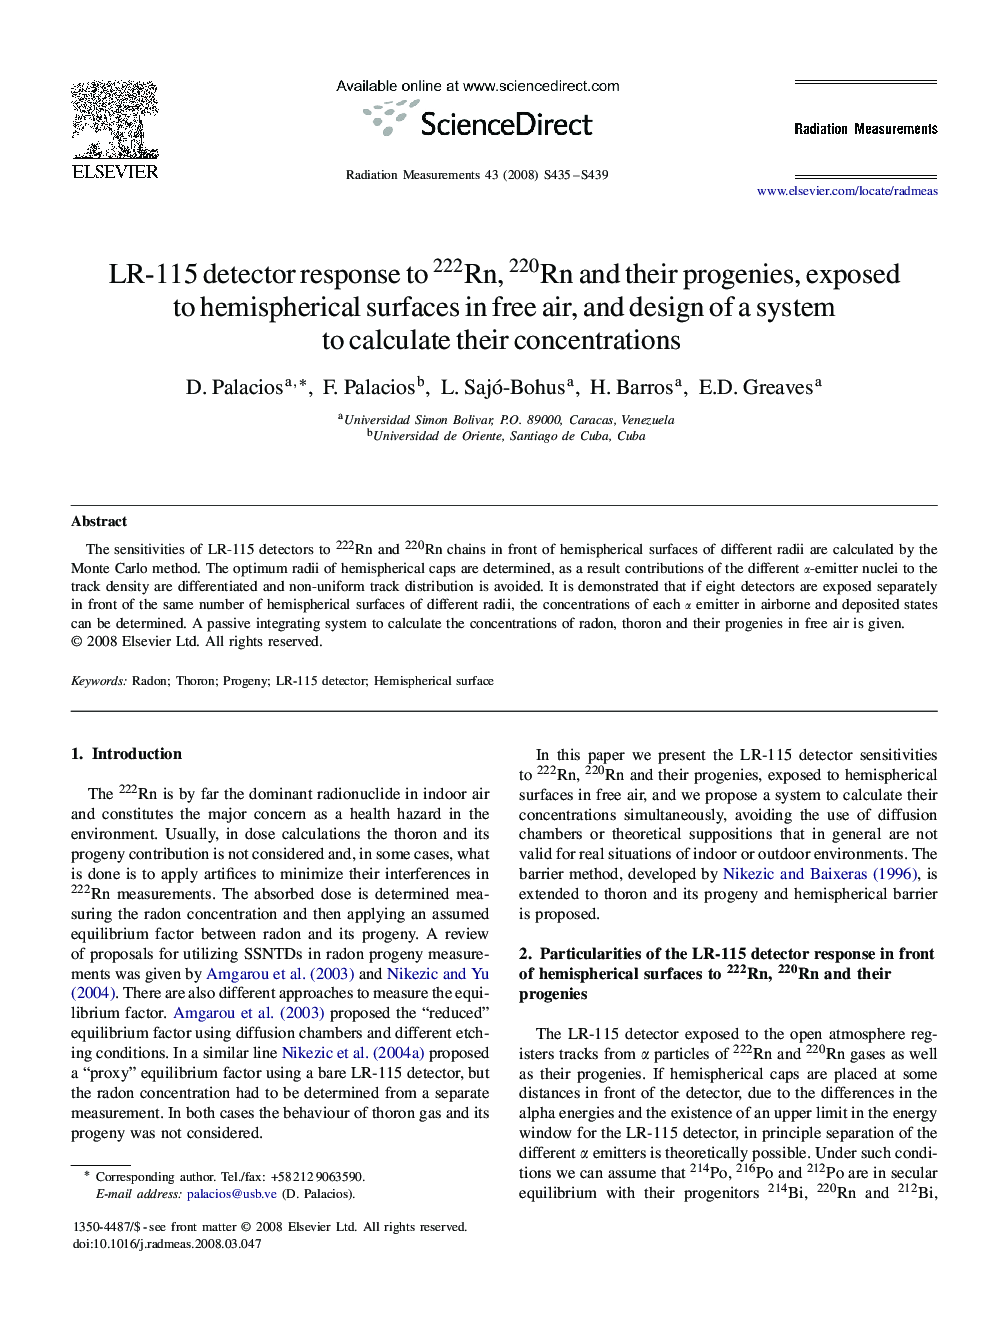 LR-115 detector response to 222Rn, 220Rn and their progenies, exposed to hemispherical surfaces in free air, and design of a system to calculate their concentrations